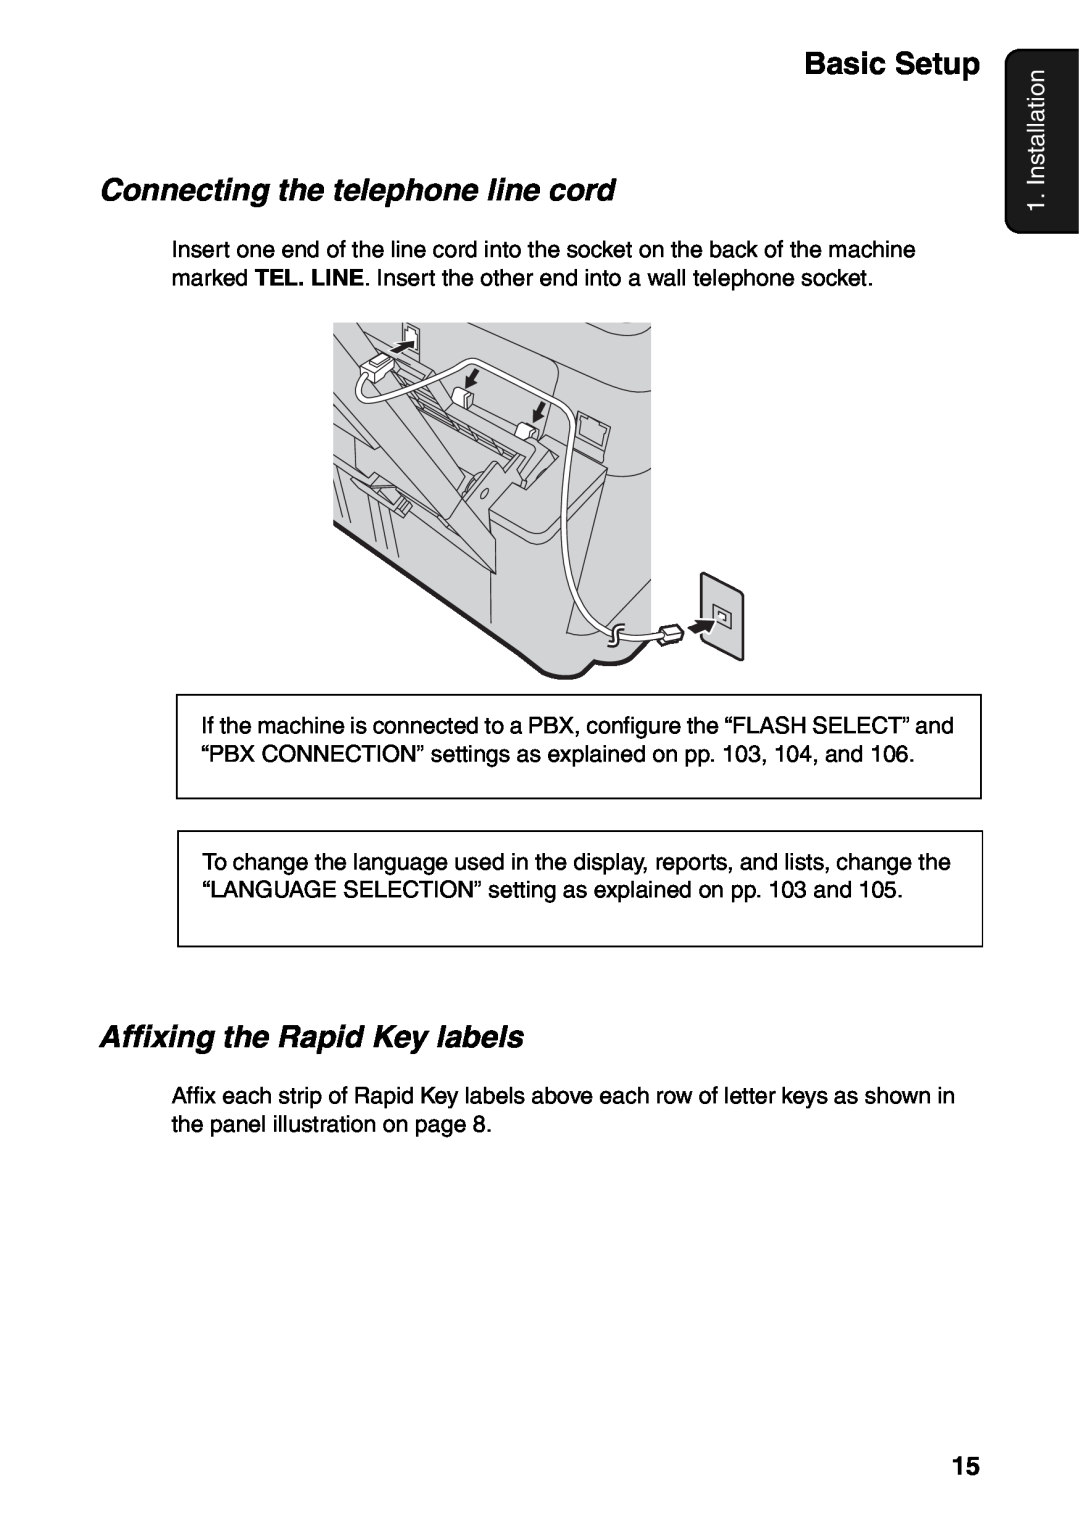 Sharp FO-IS115N operation manual Connecting the telephone line cord, Affixing the Rapid Key labels, Installation 